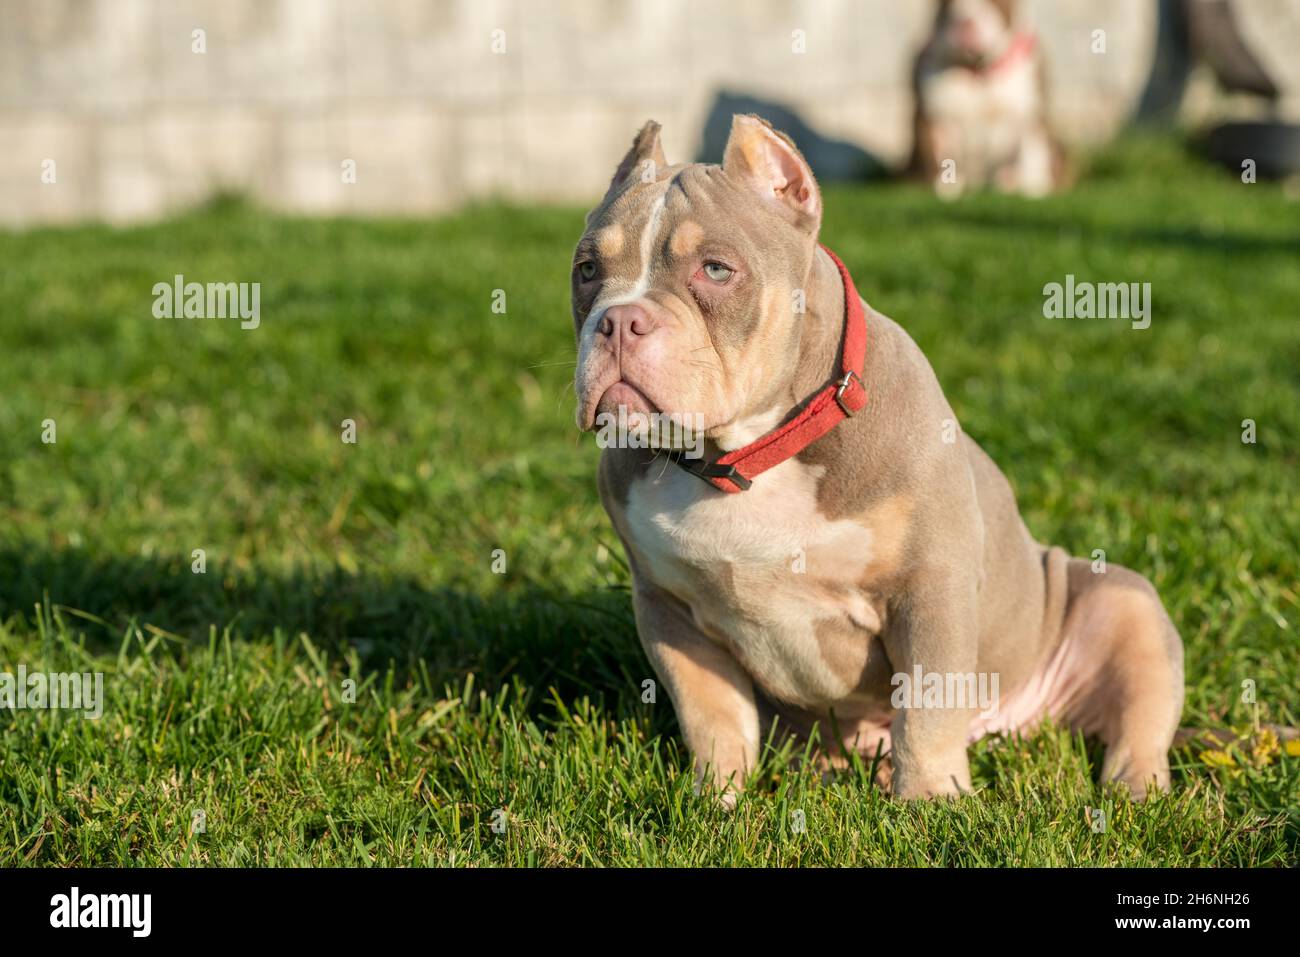 Purebred Canine American Bully Pet Dog Sitting On Grass Stock